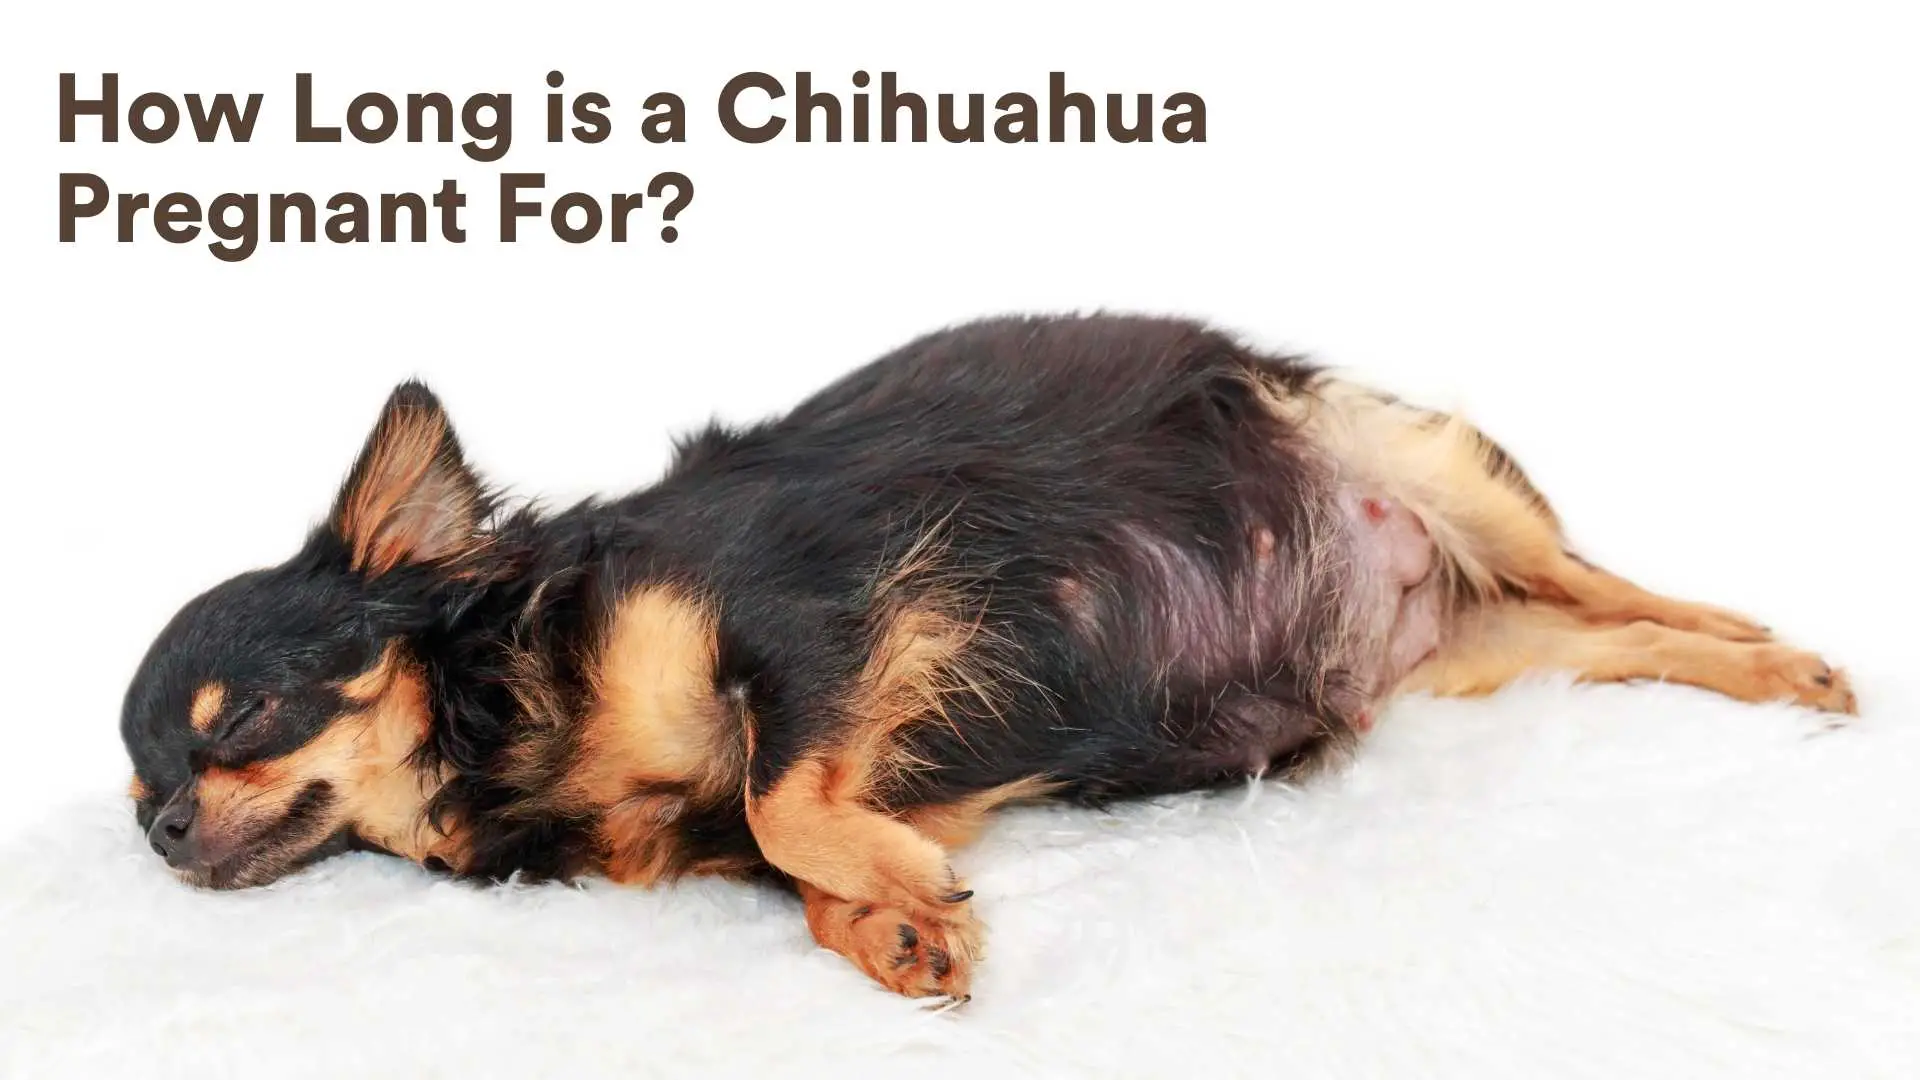 How Long is a Chihuahua Pregnant For?